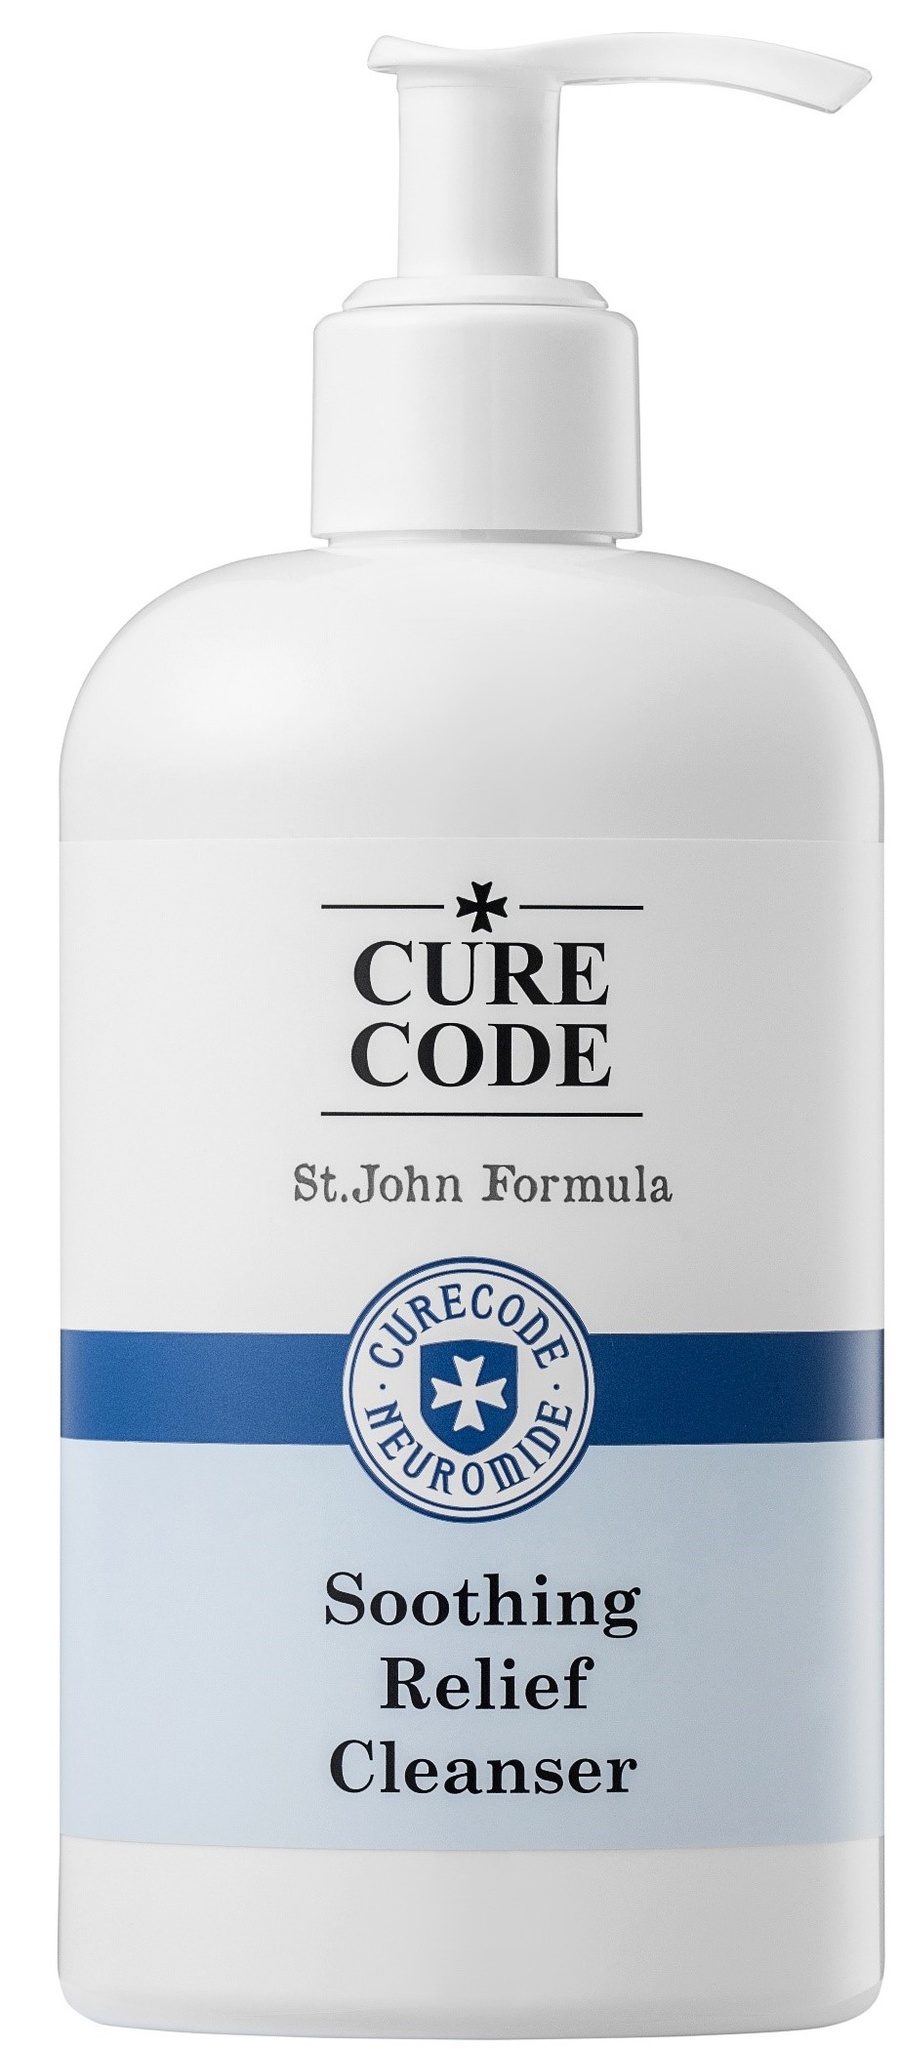 CureCode Soothing Relief Cleanser